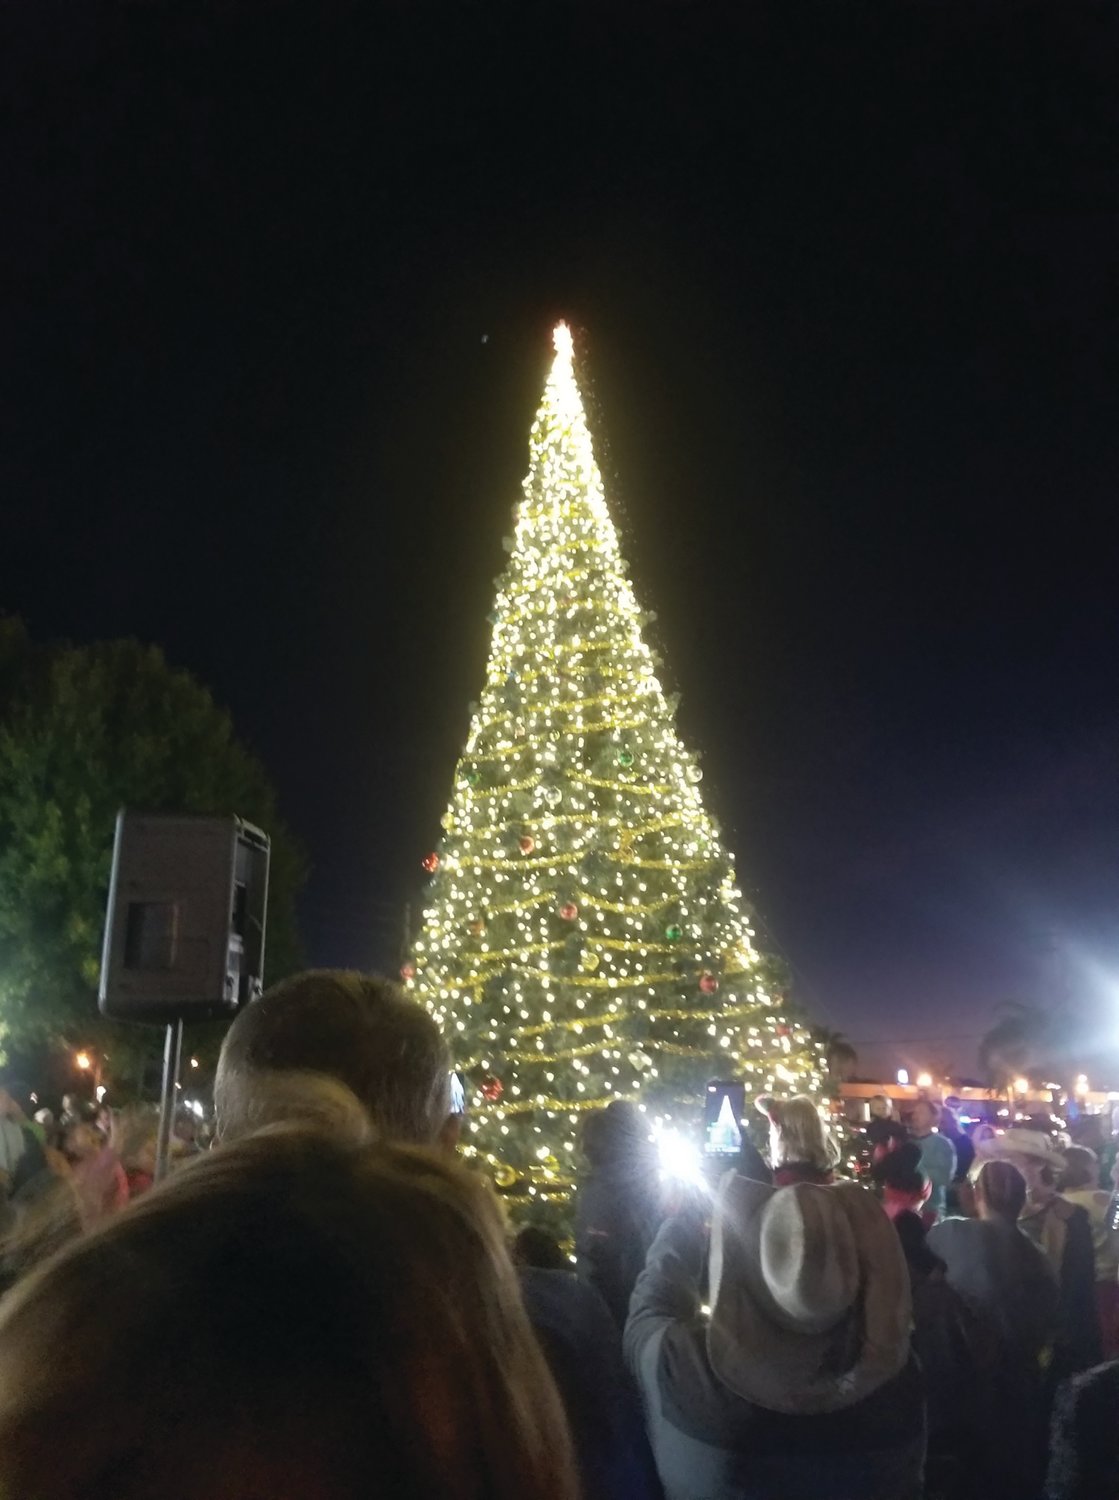 The city’s annual tree lighting event is something the citizens of Okeechobee look forward to all year.